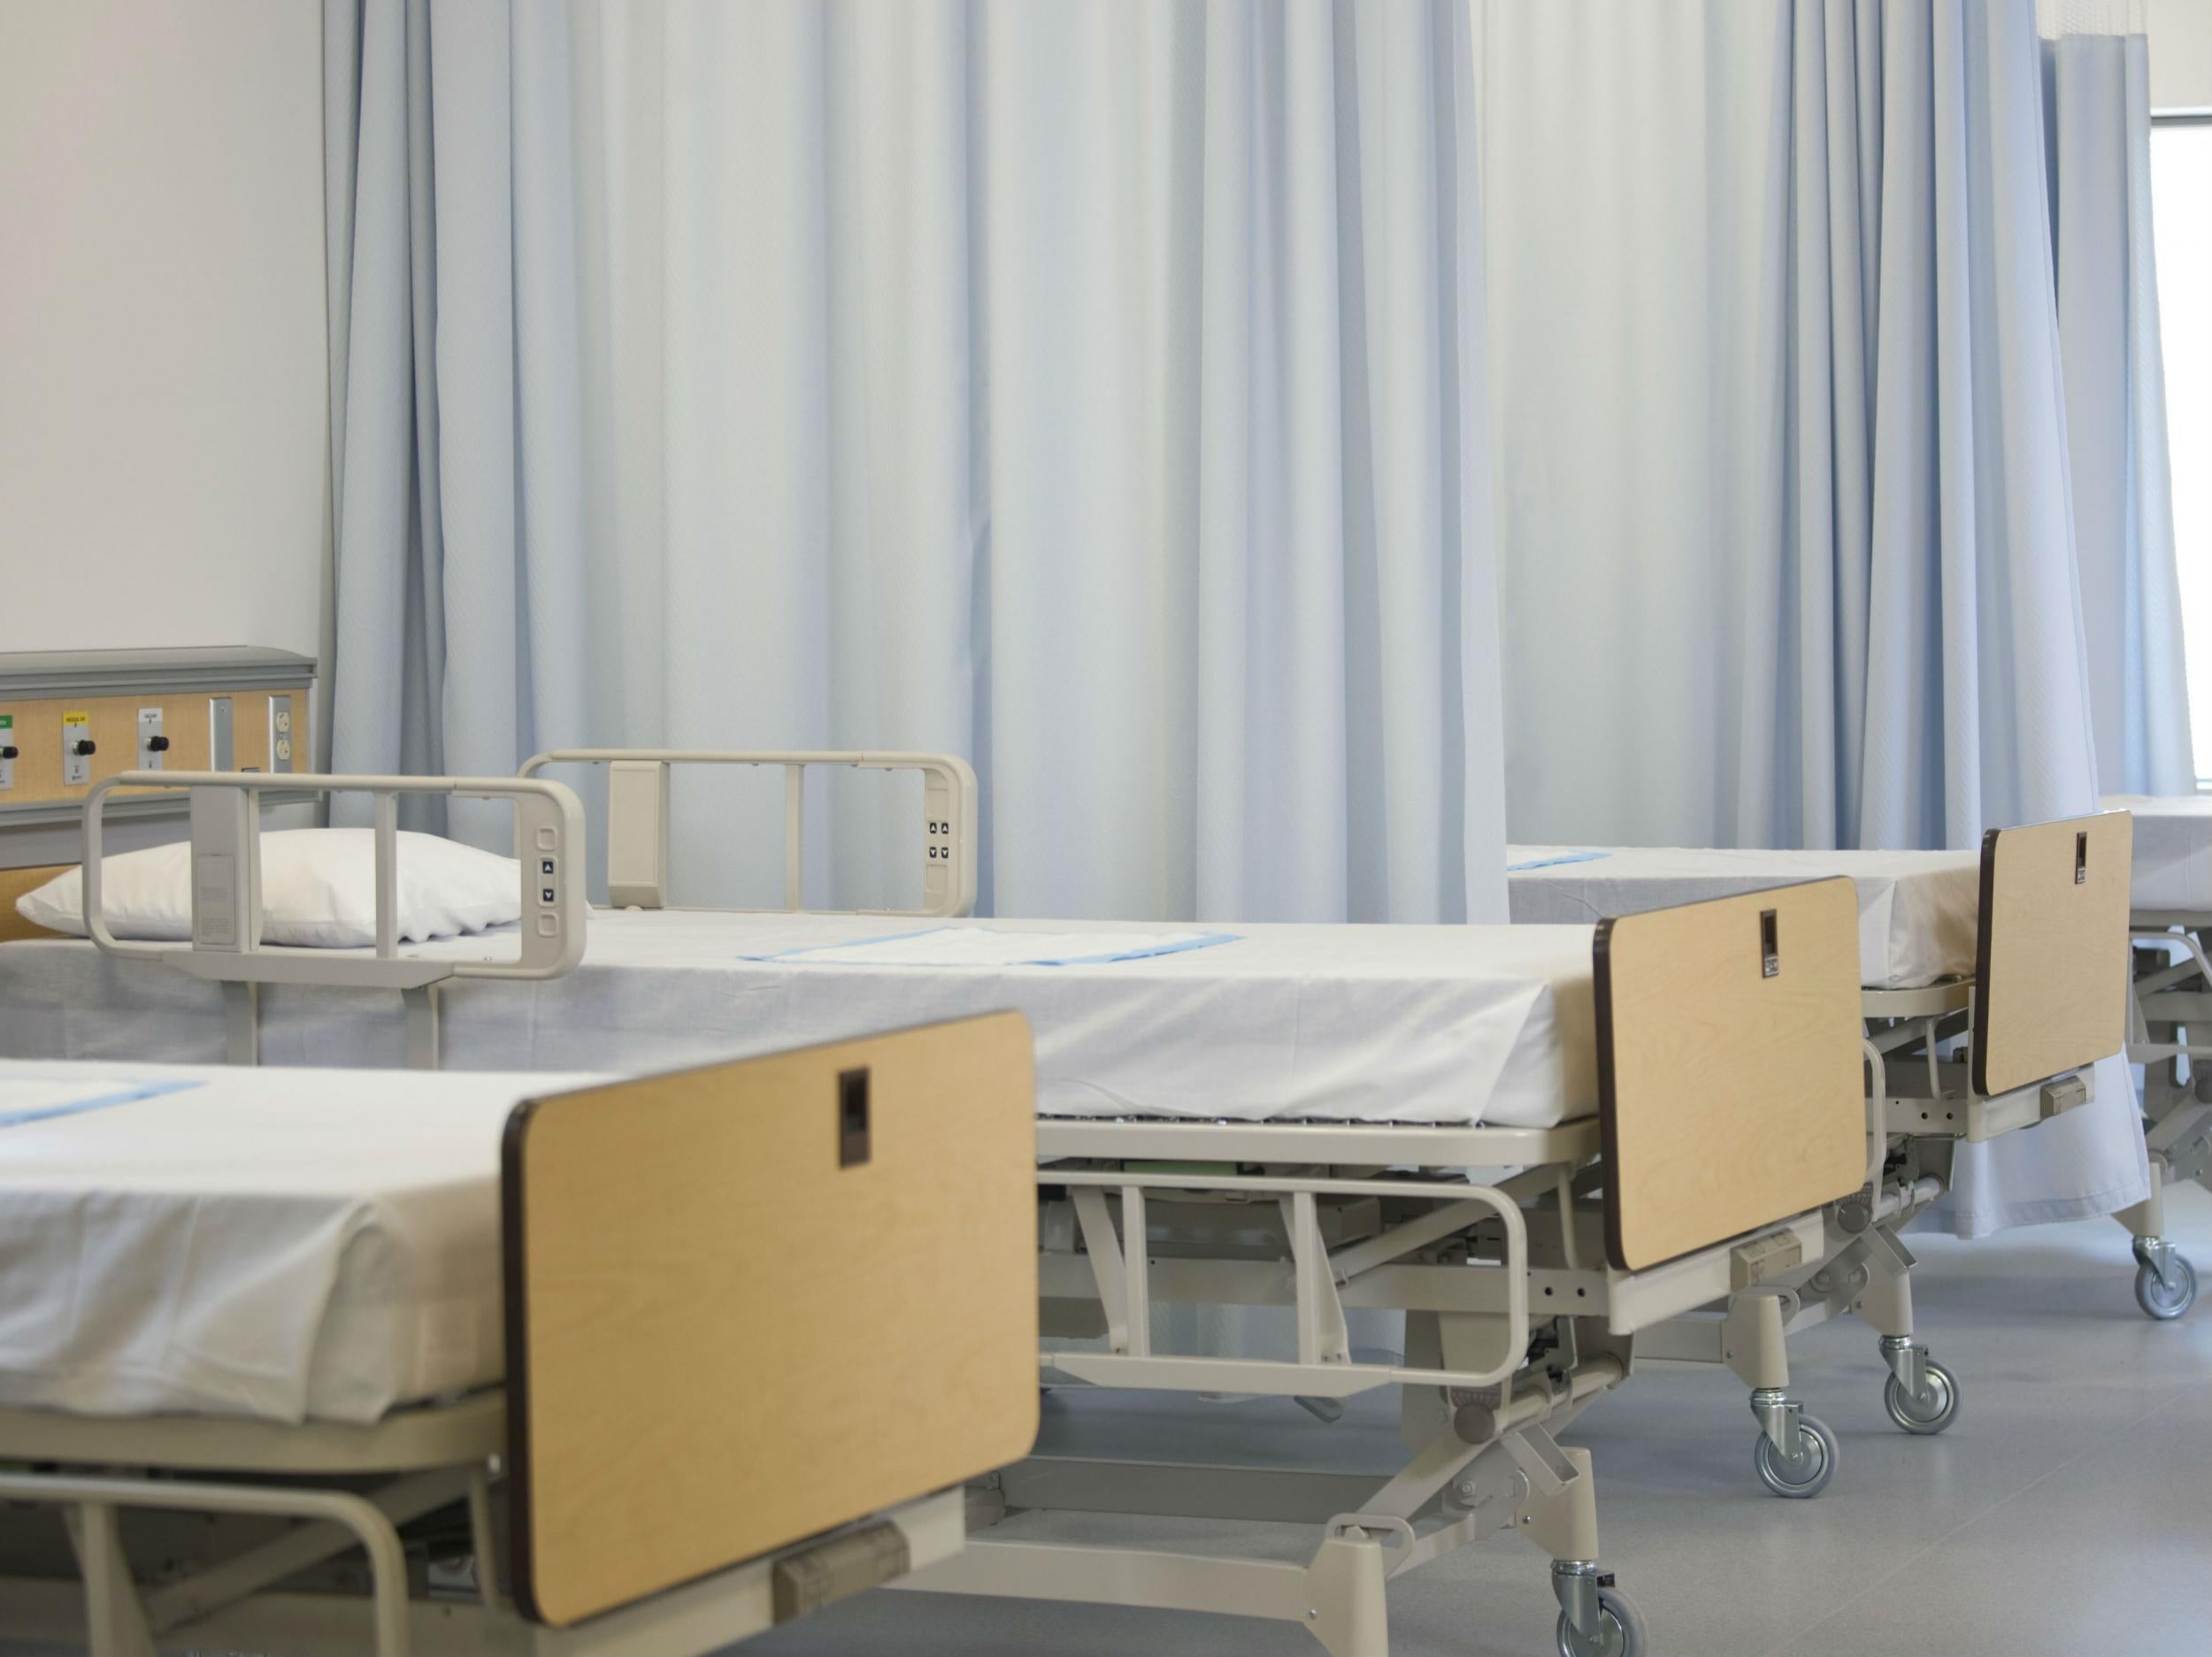 Empty hospital beds (stock image). The 29-year-old was admitted to a psychiatric hospital in New Jersey